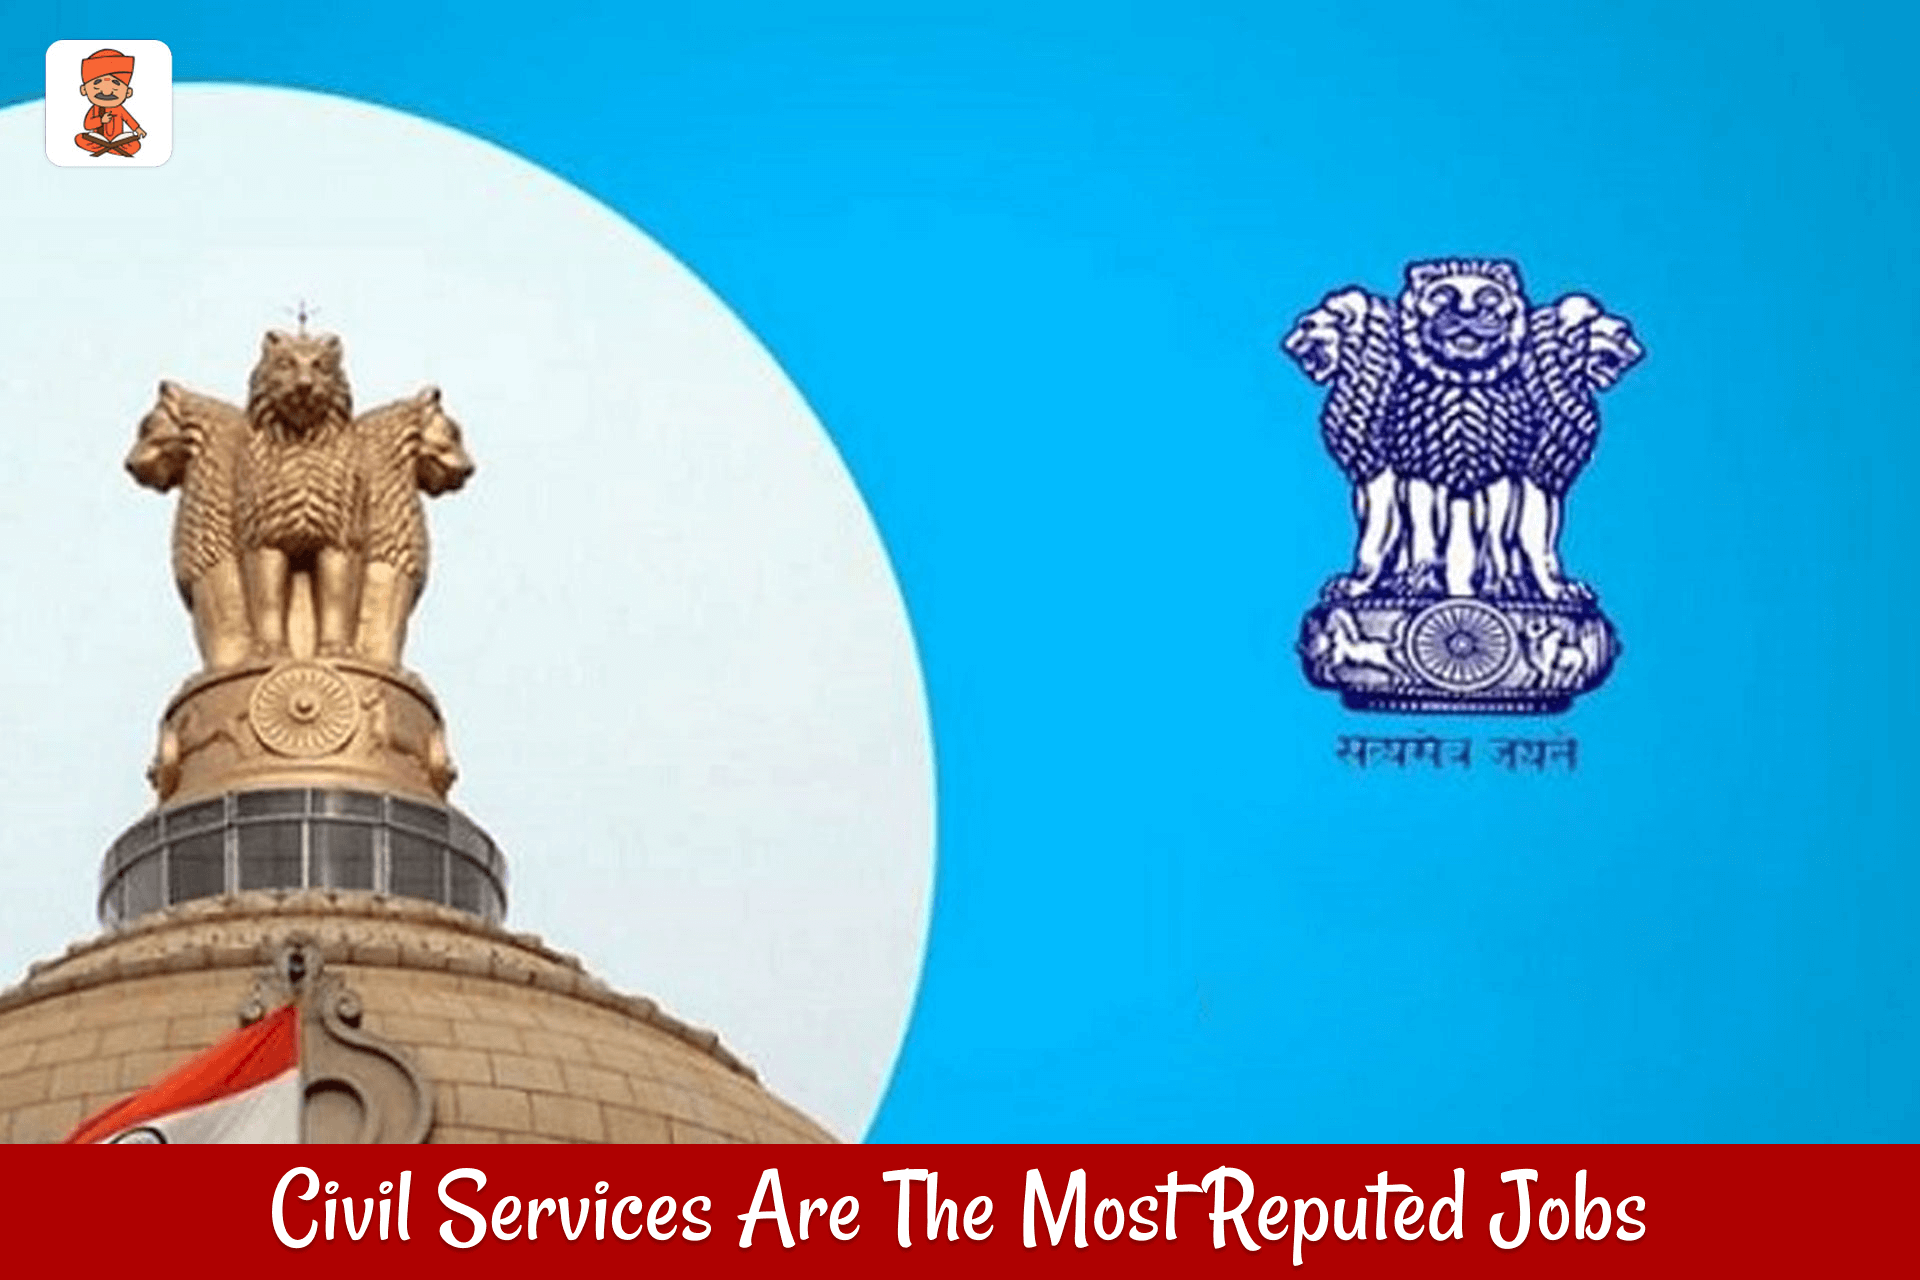 Civil Services Are The Most Reputed Jobs In The Country